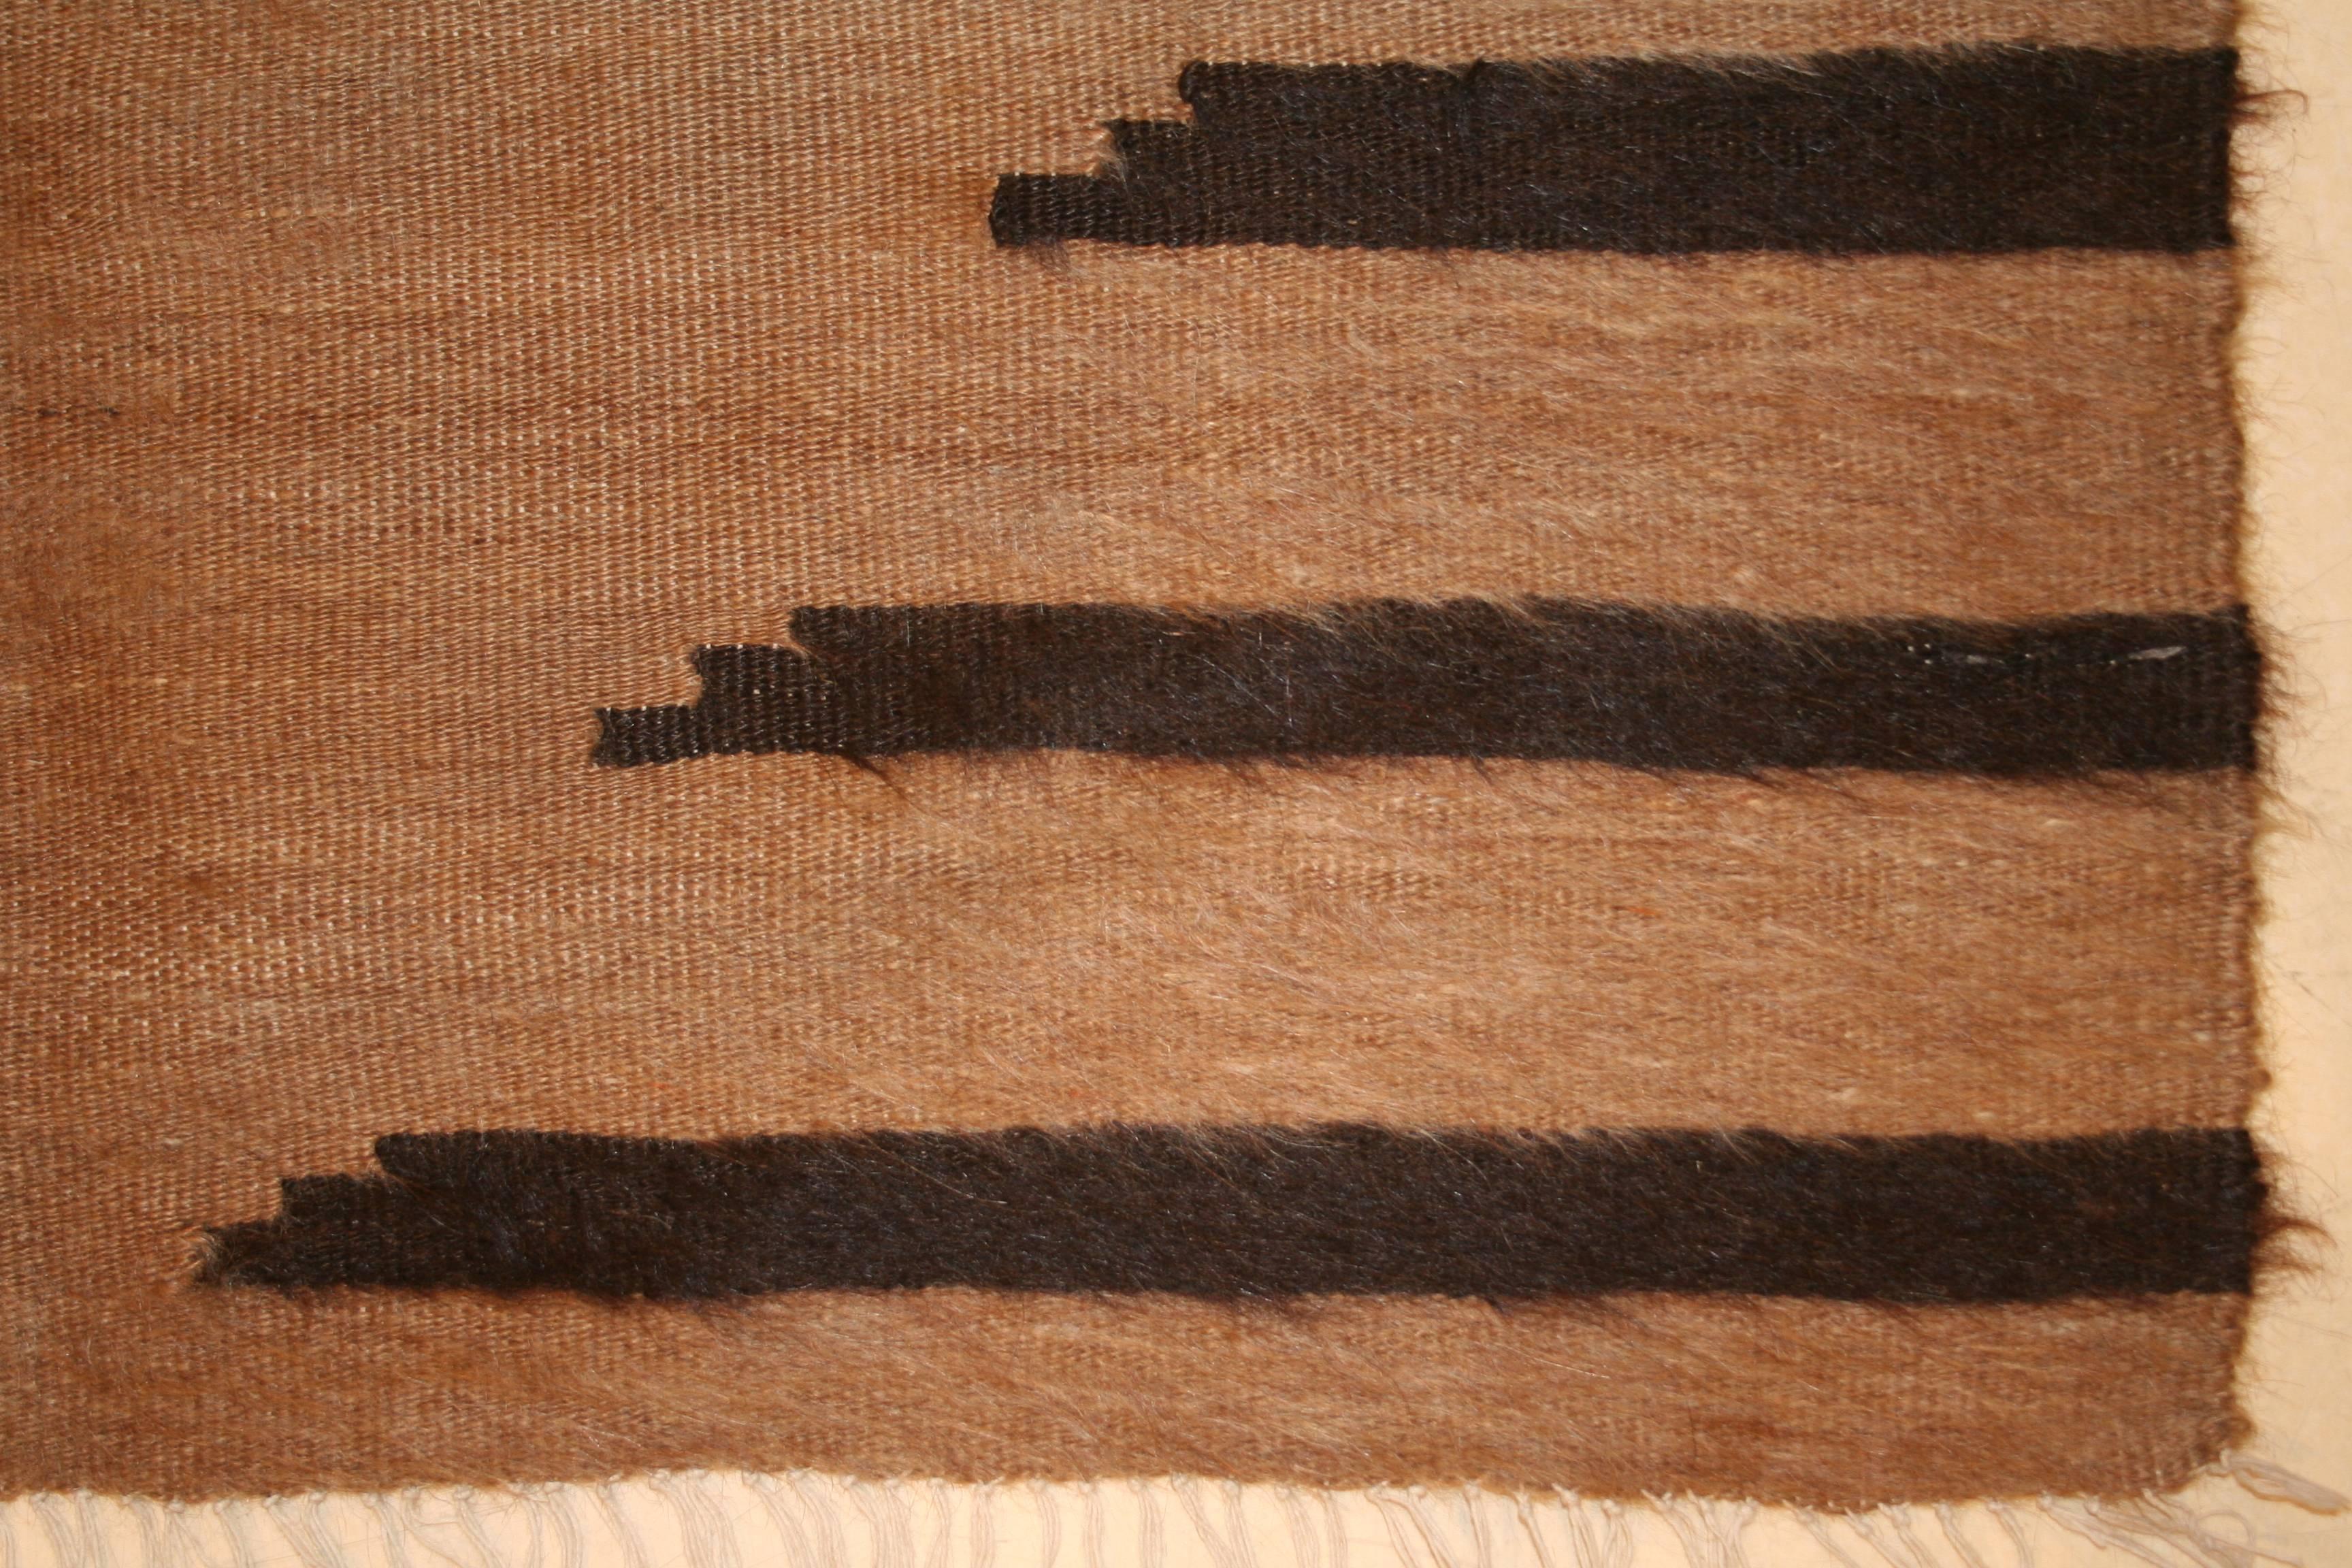 Woven by Kurdish people located in the eastern Anatolian village of Siirt, weft-faced plain weaves of this type employ silky goat hair using a technique which dates back to about 6000 BC, when the first textiles began to appear in the Fertile